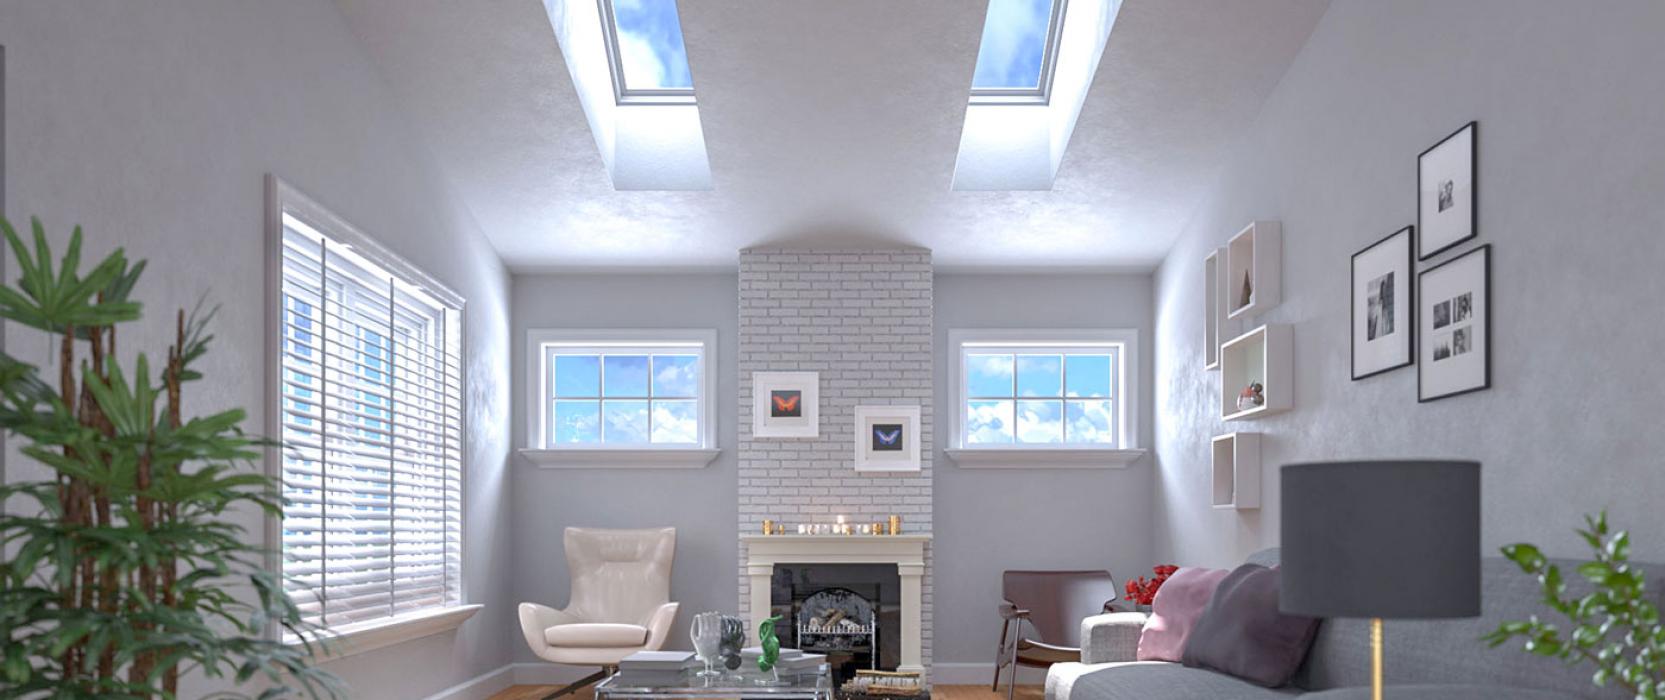 Velux Skylights fill a living room with natural light